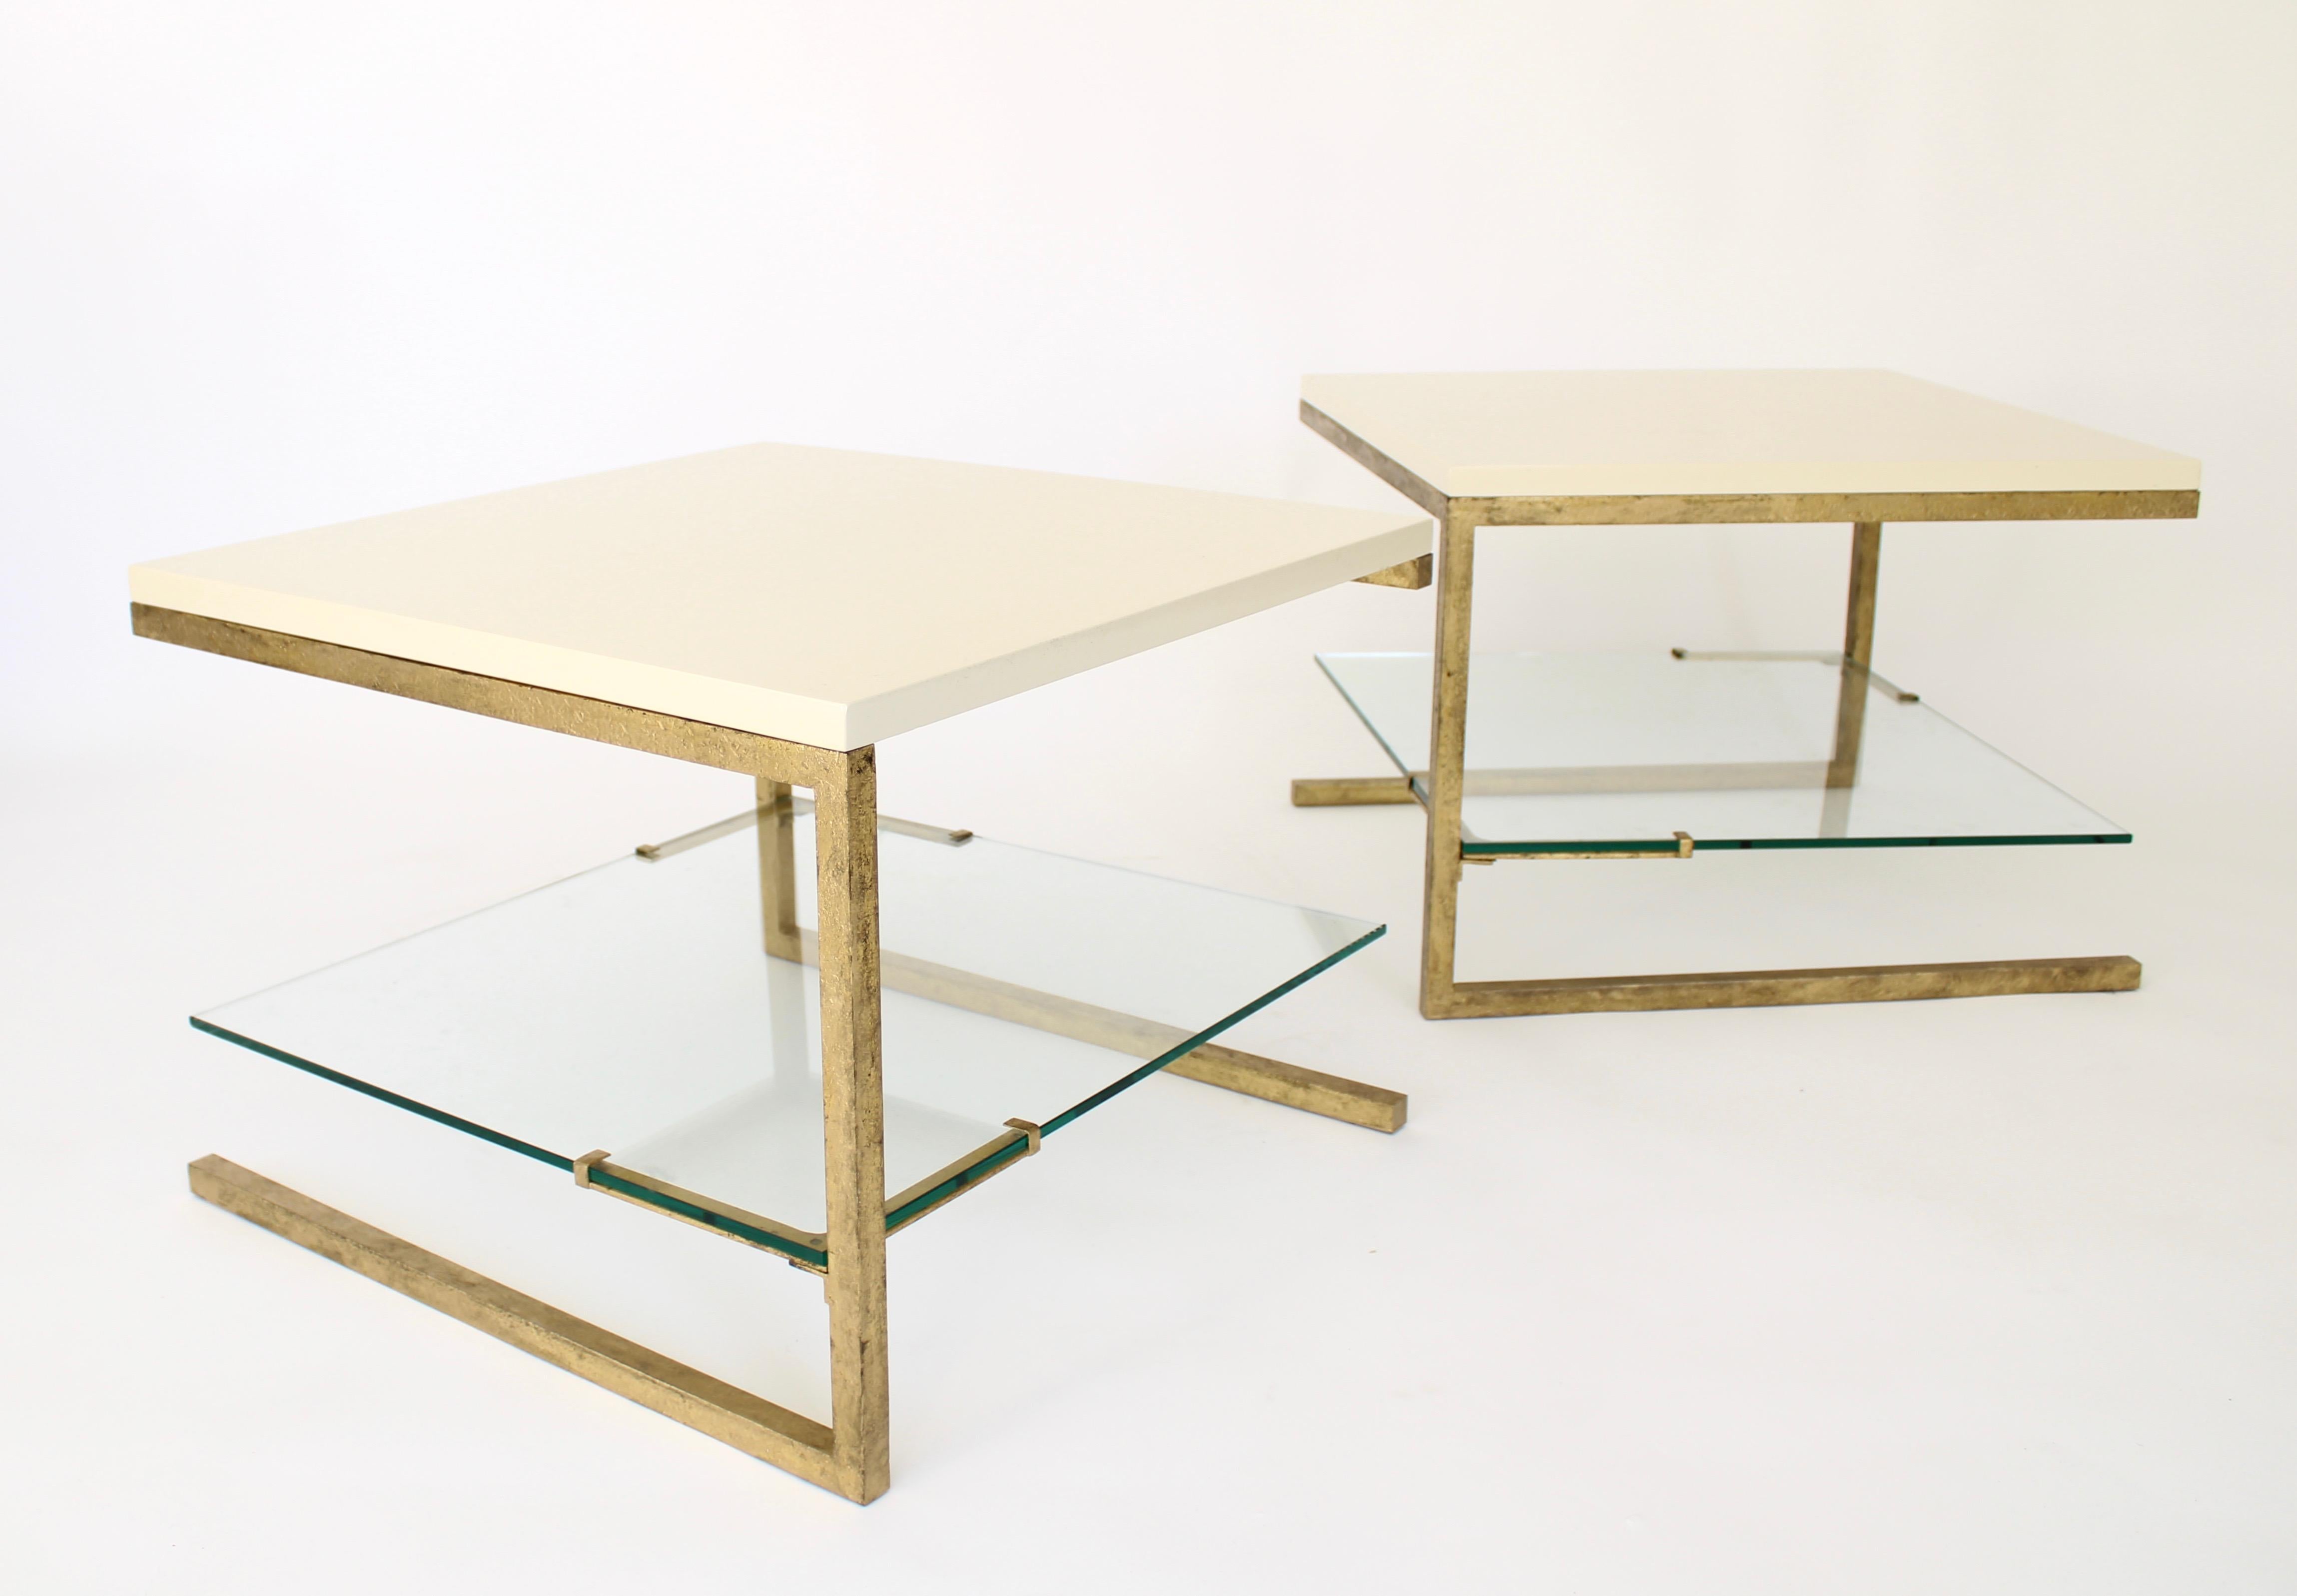  Maison Ramsay Side Tables Pair of Cream Lacquered Top Gilded Iron Frame Work 1